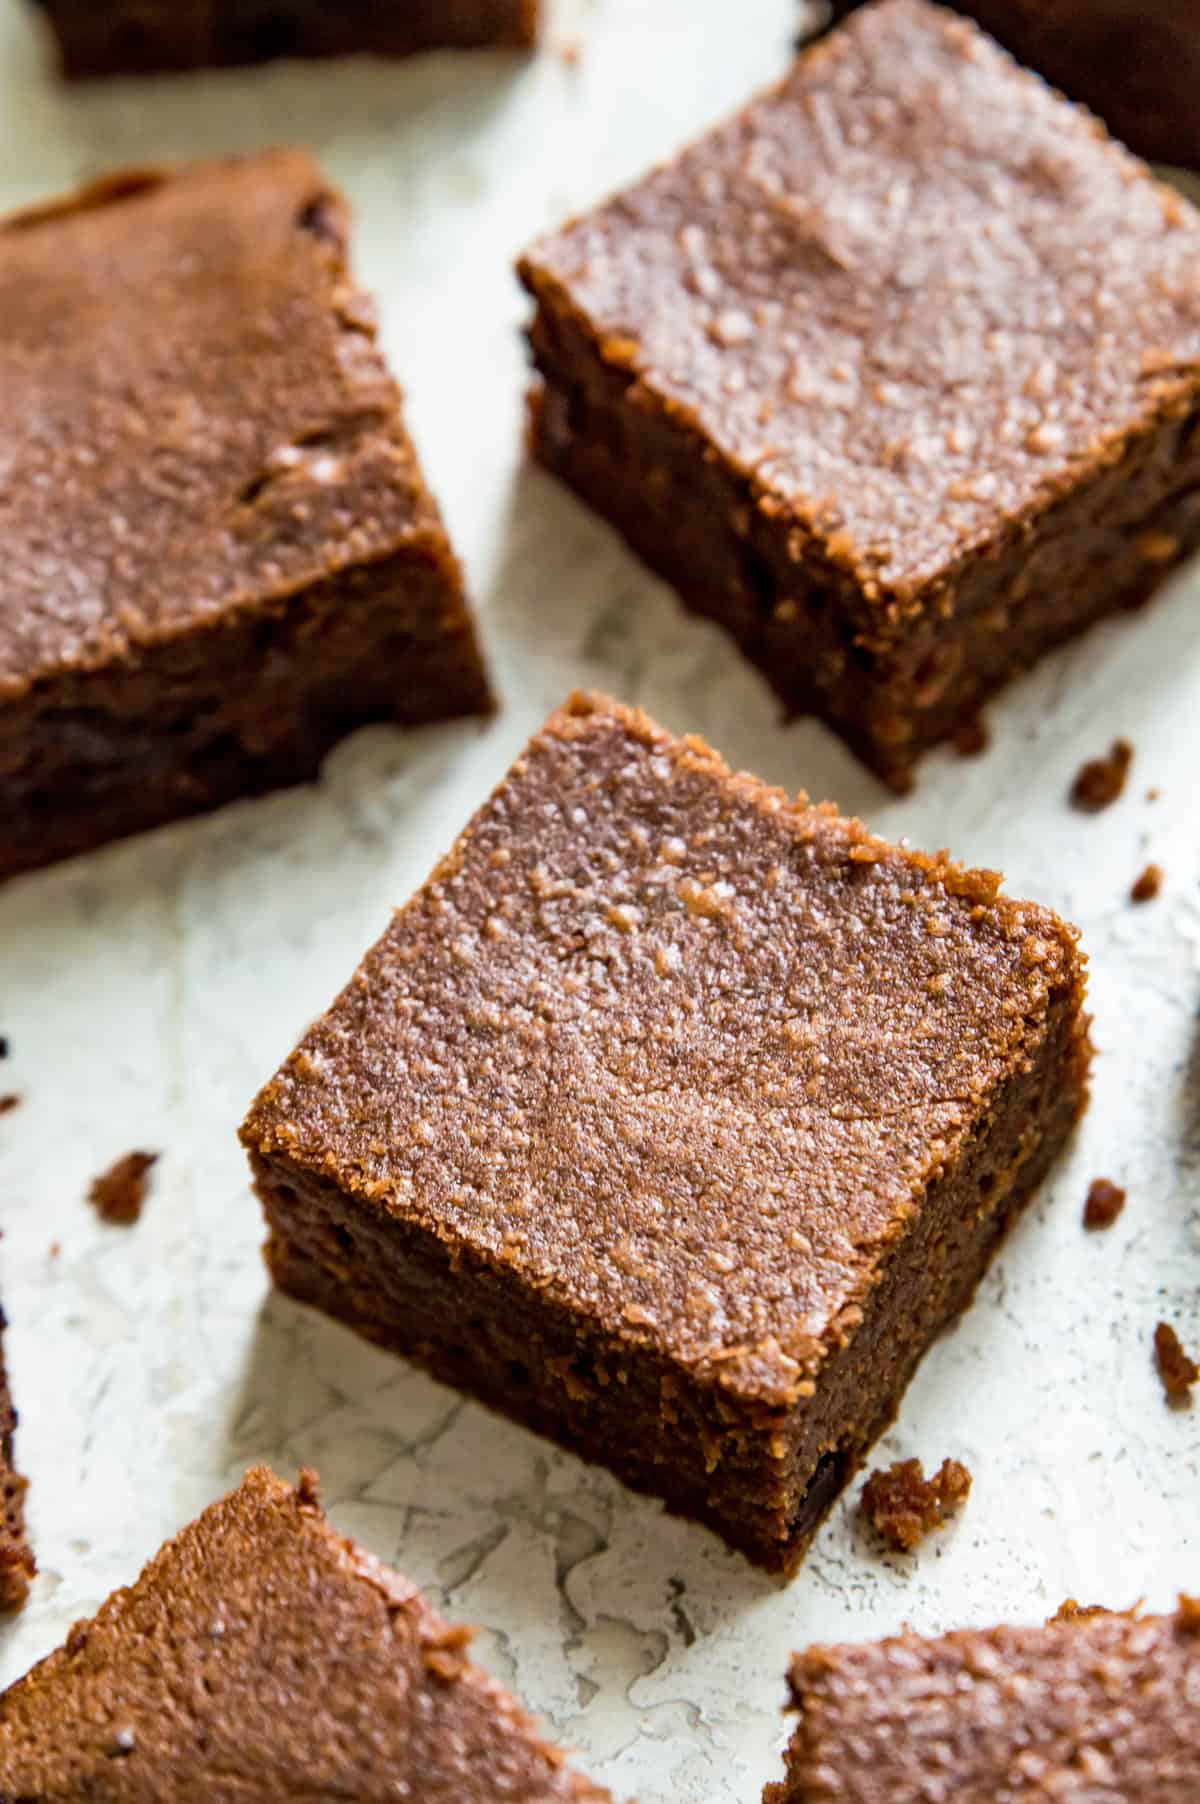 Condensed milk brownies cut into pieces on a serving tray.